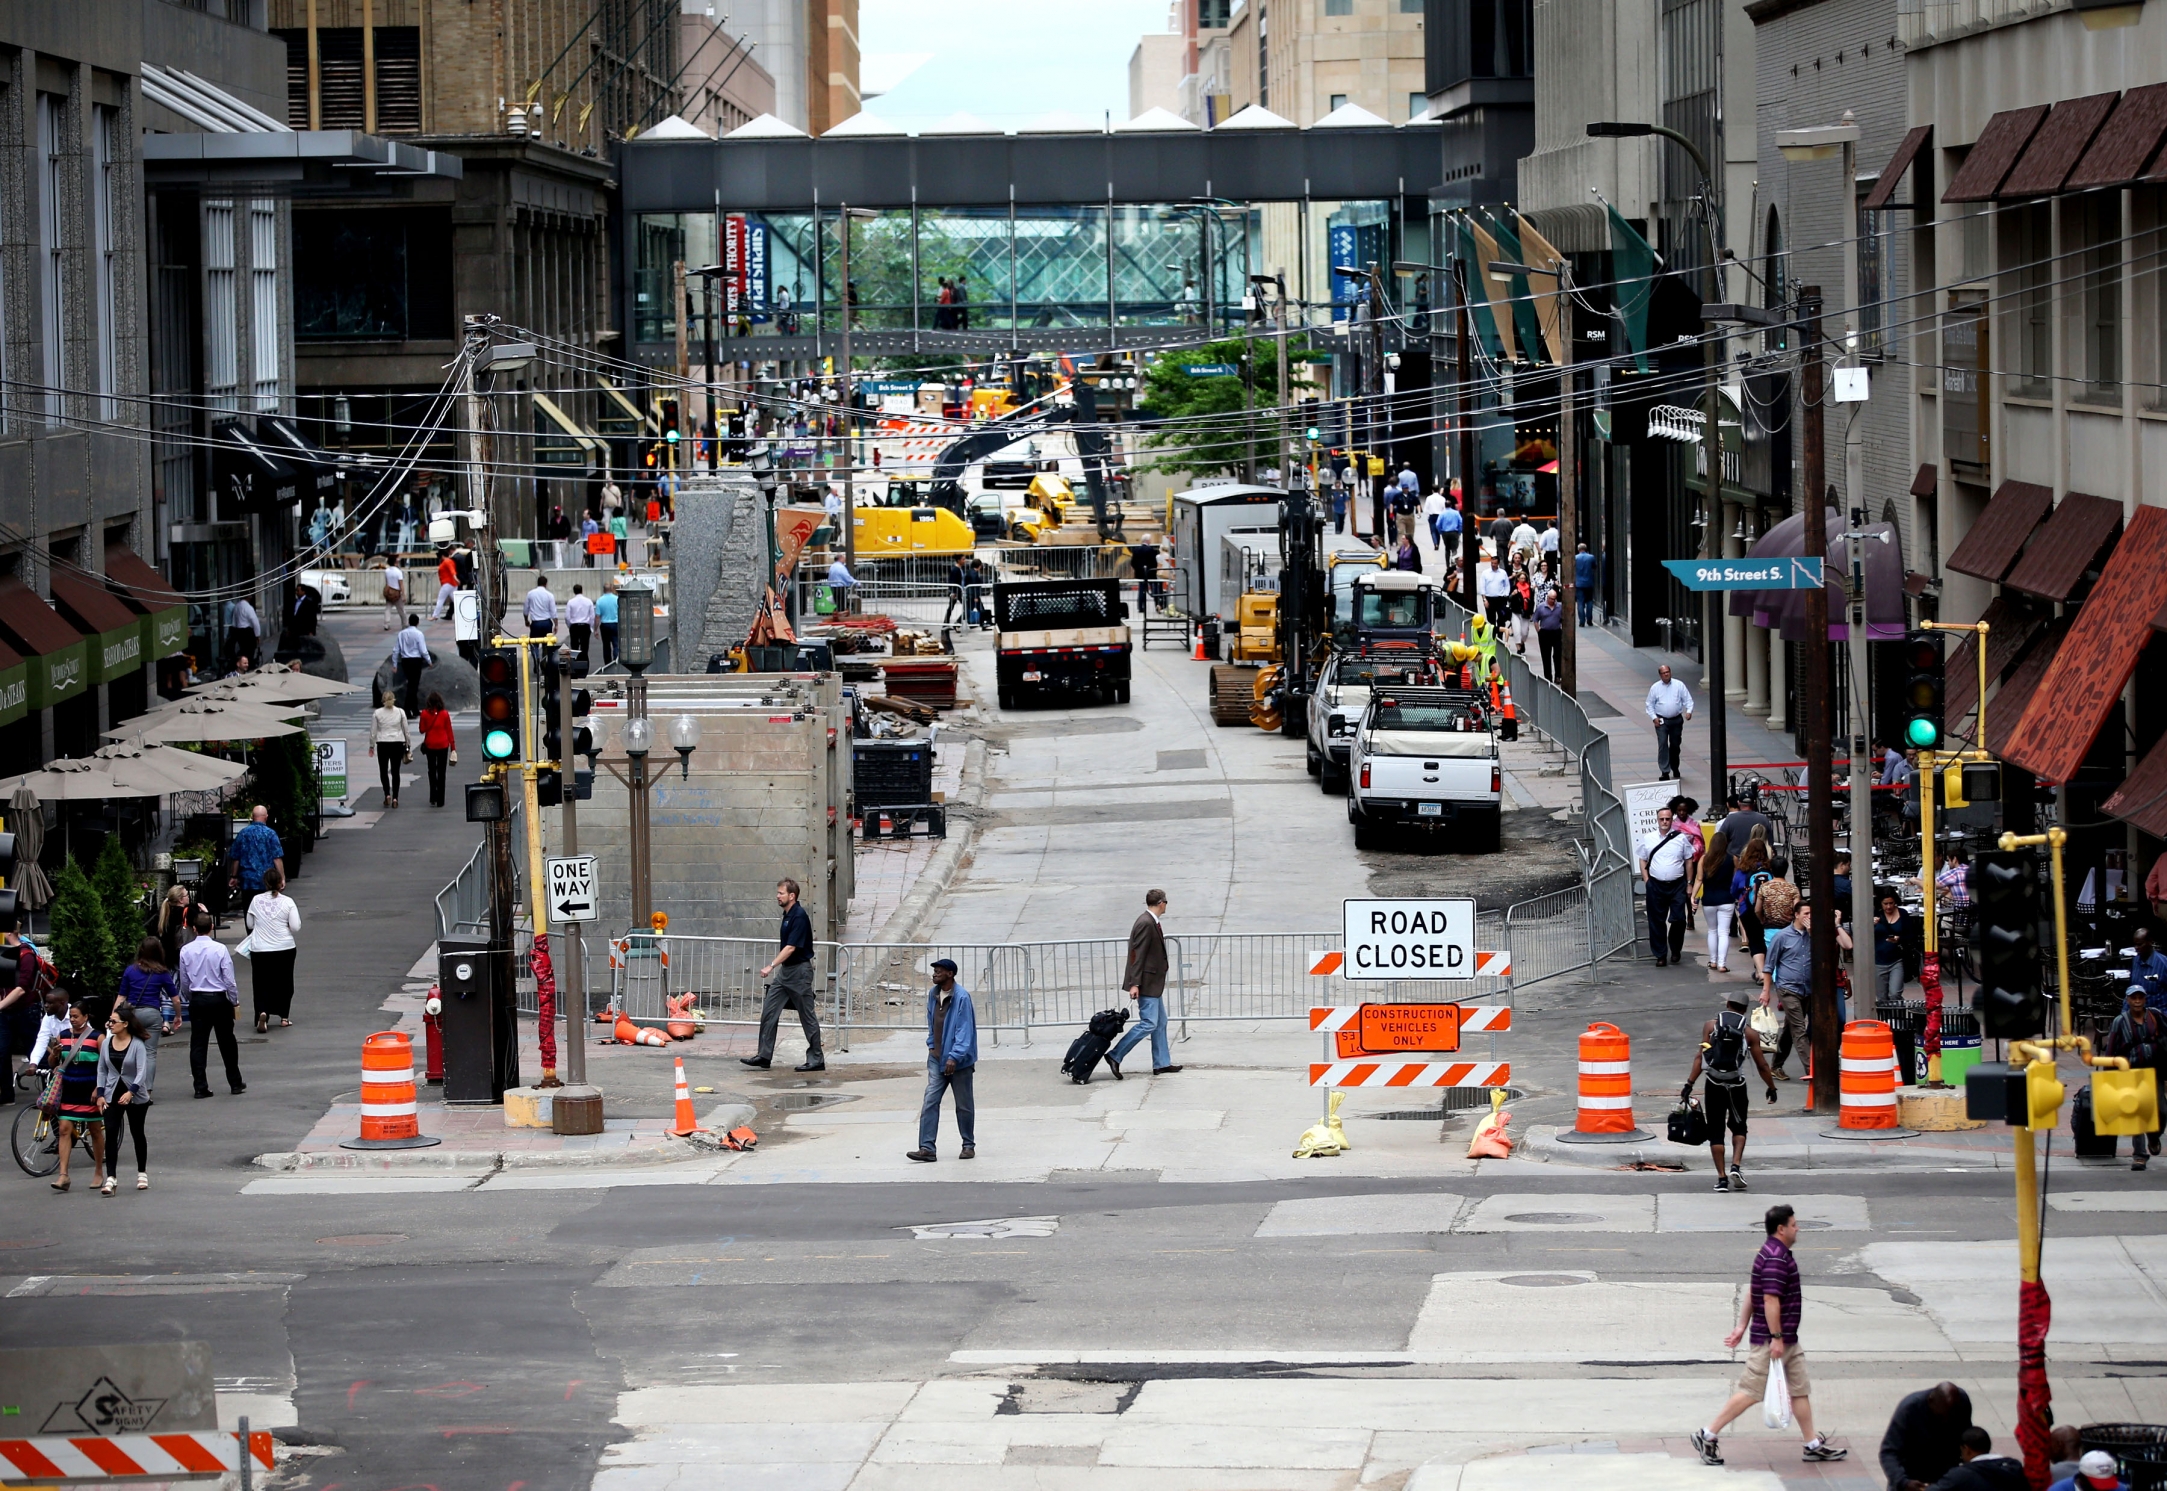 A photograph from the Target skyway of pedestrian crossing Nicollet Avenue near 8th street amidst construction.